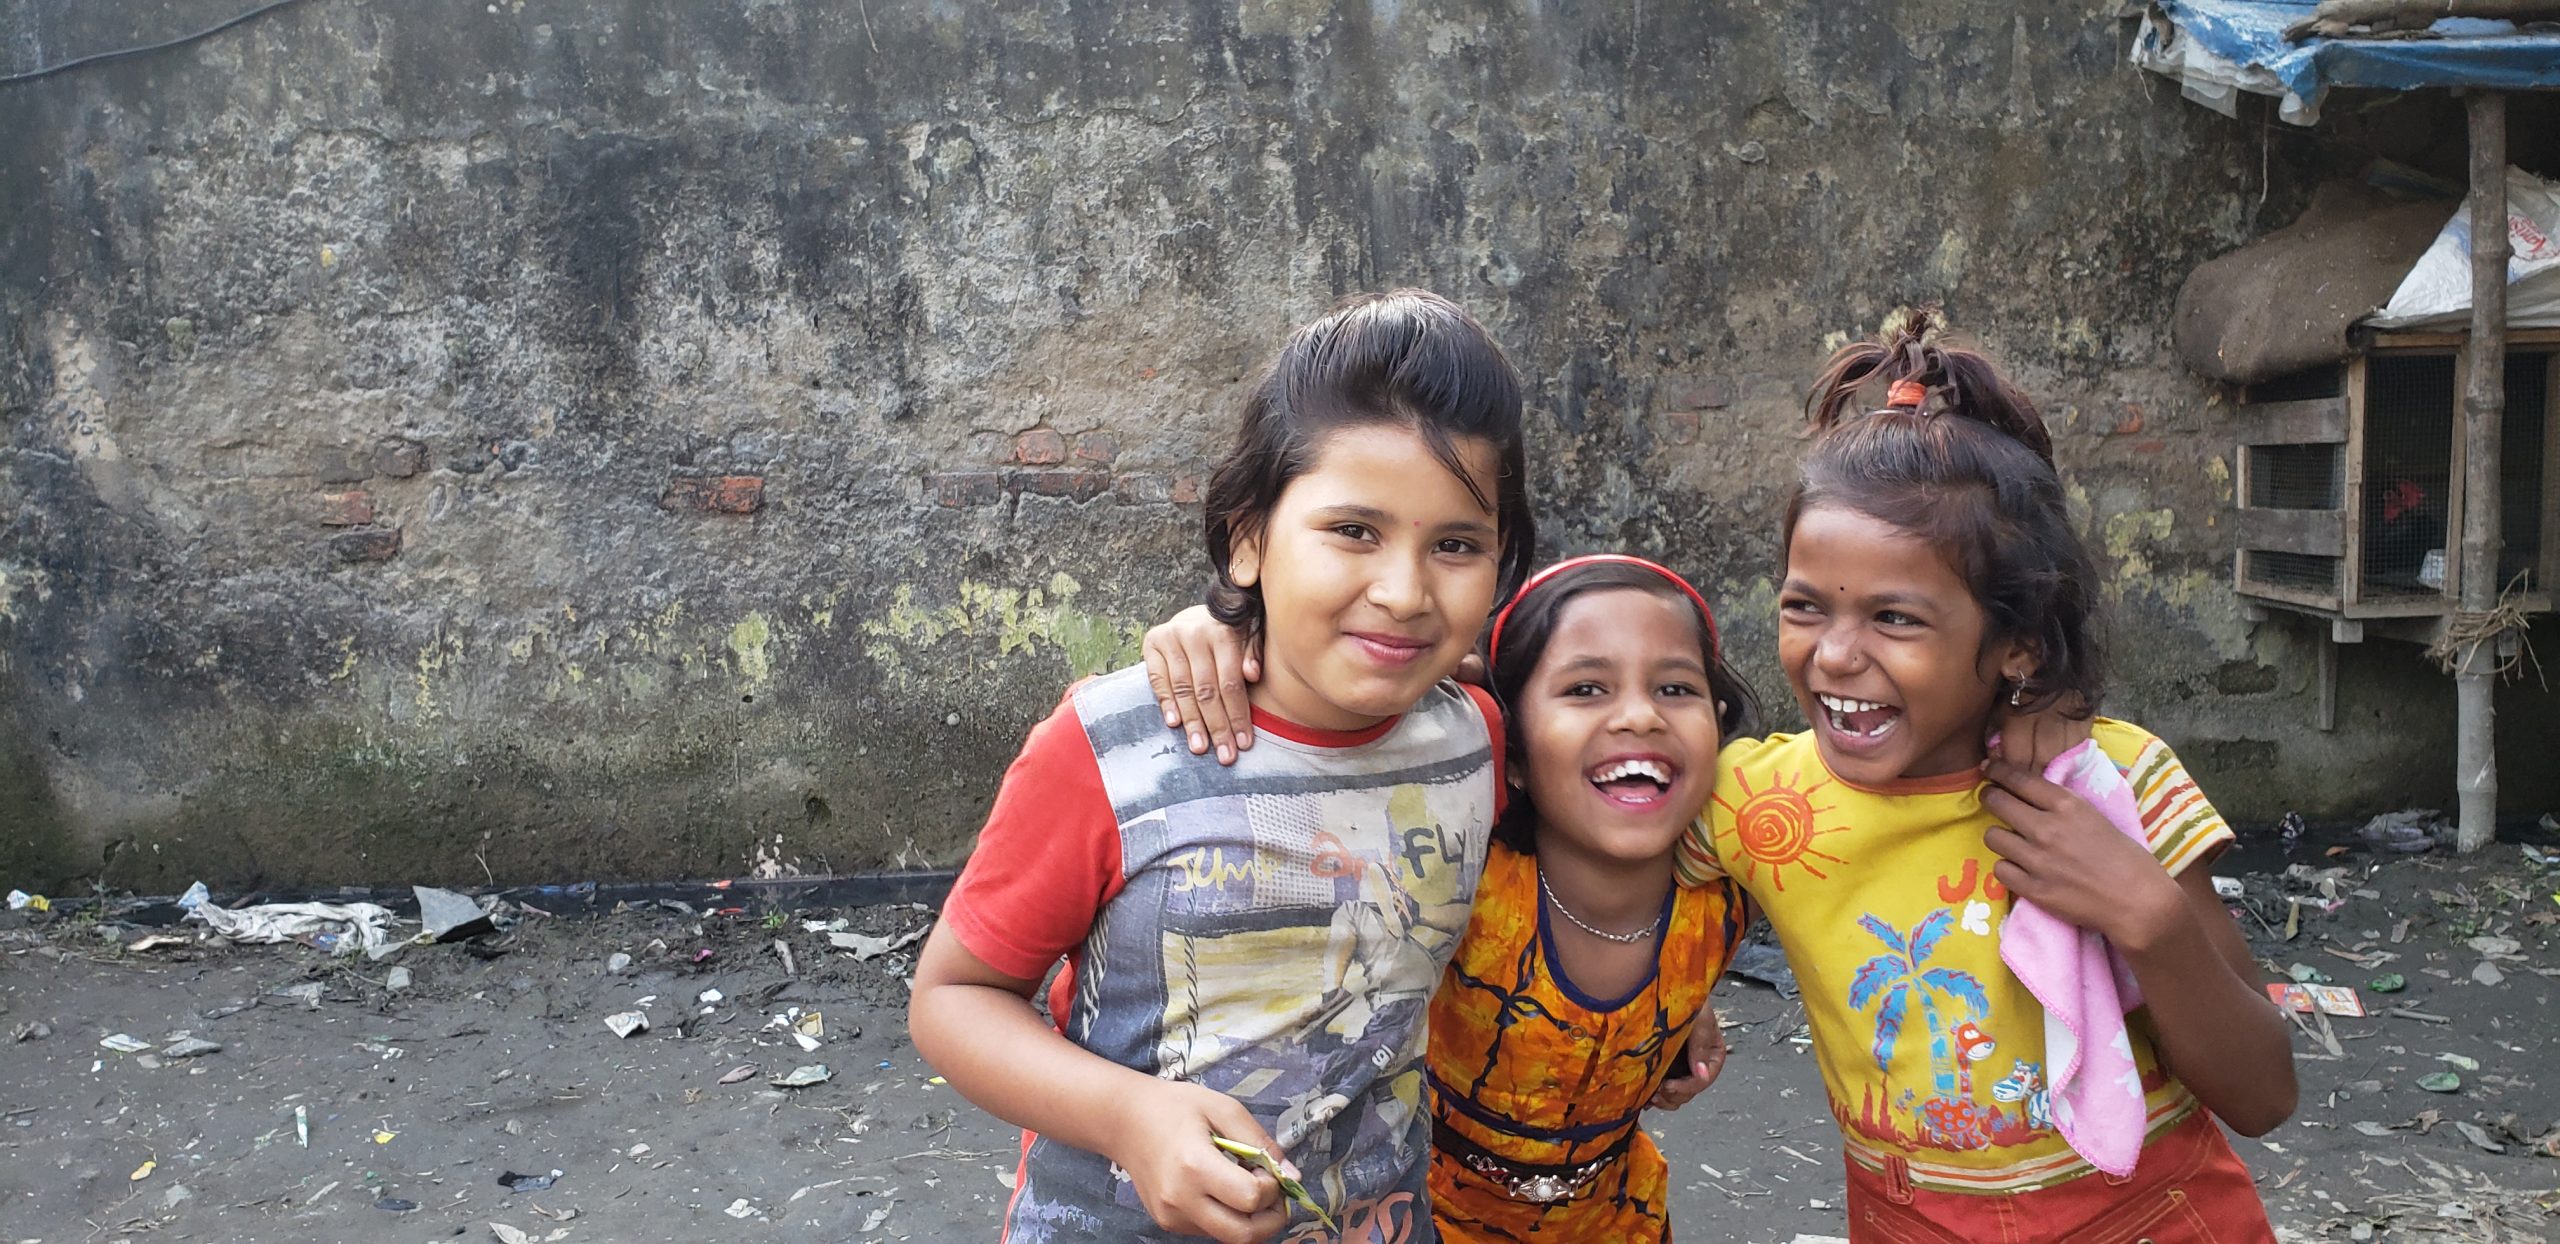 three young girls laughing in India